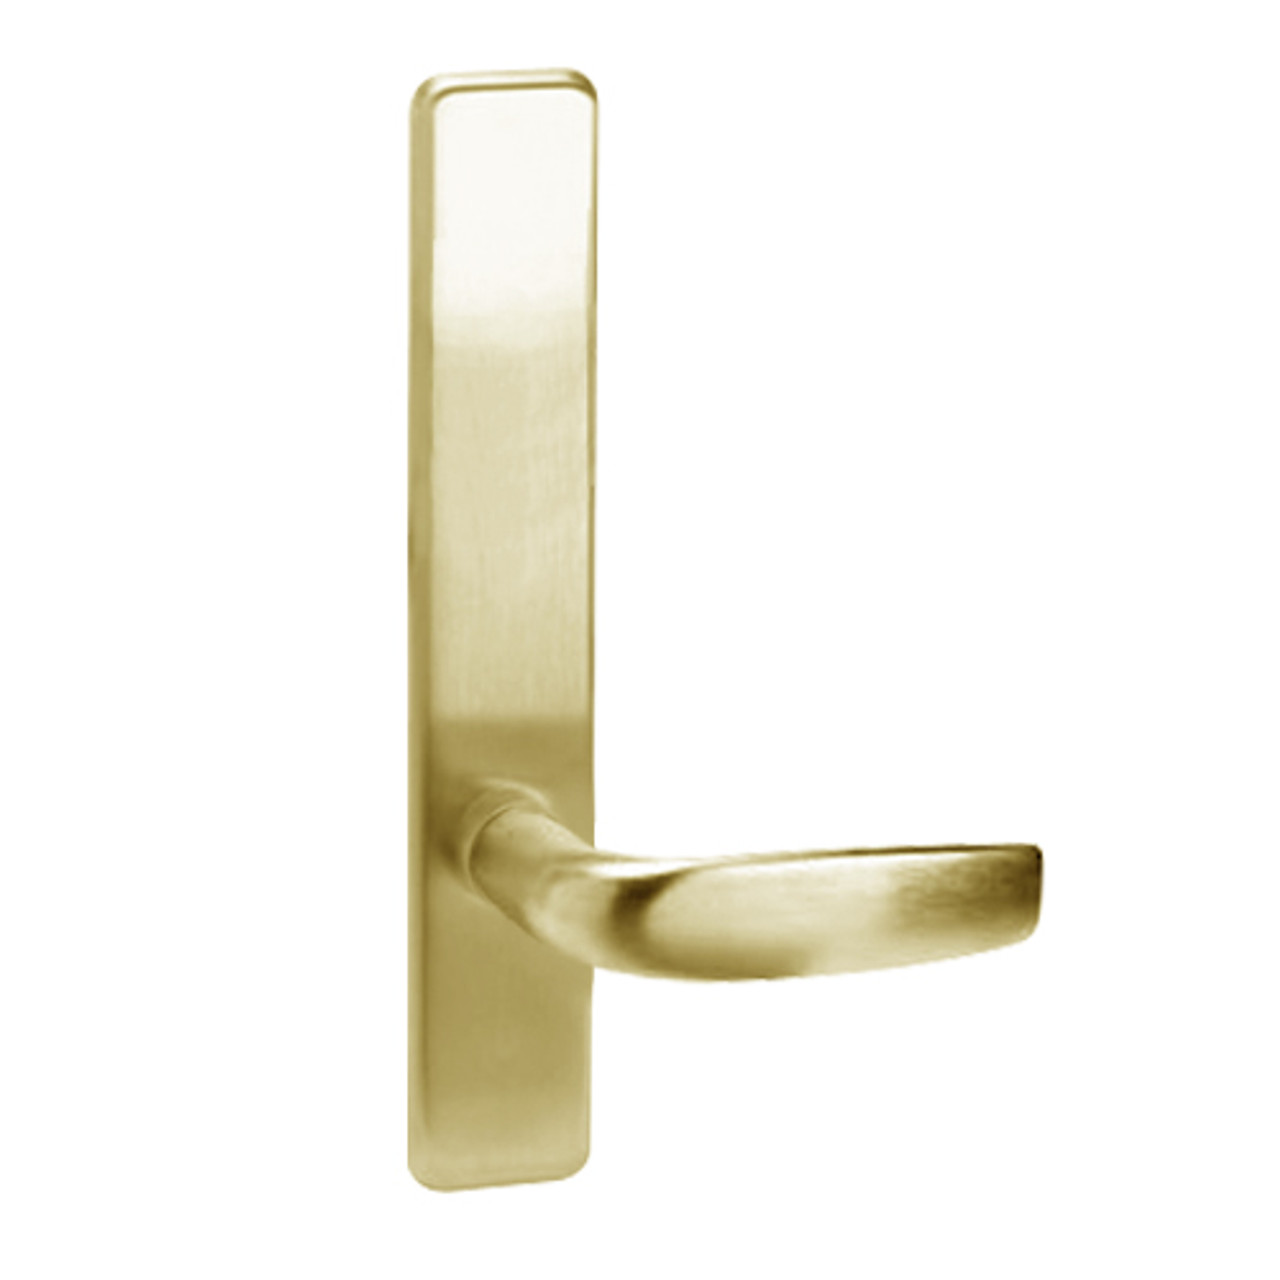 C855-606-LHR Corbin ED4000 Series Exit Device Trim with Classroom Citation Lever in Satin Brass Finish